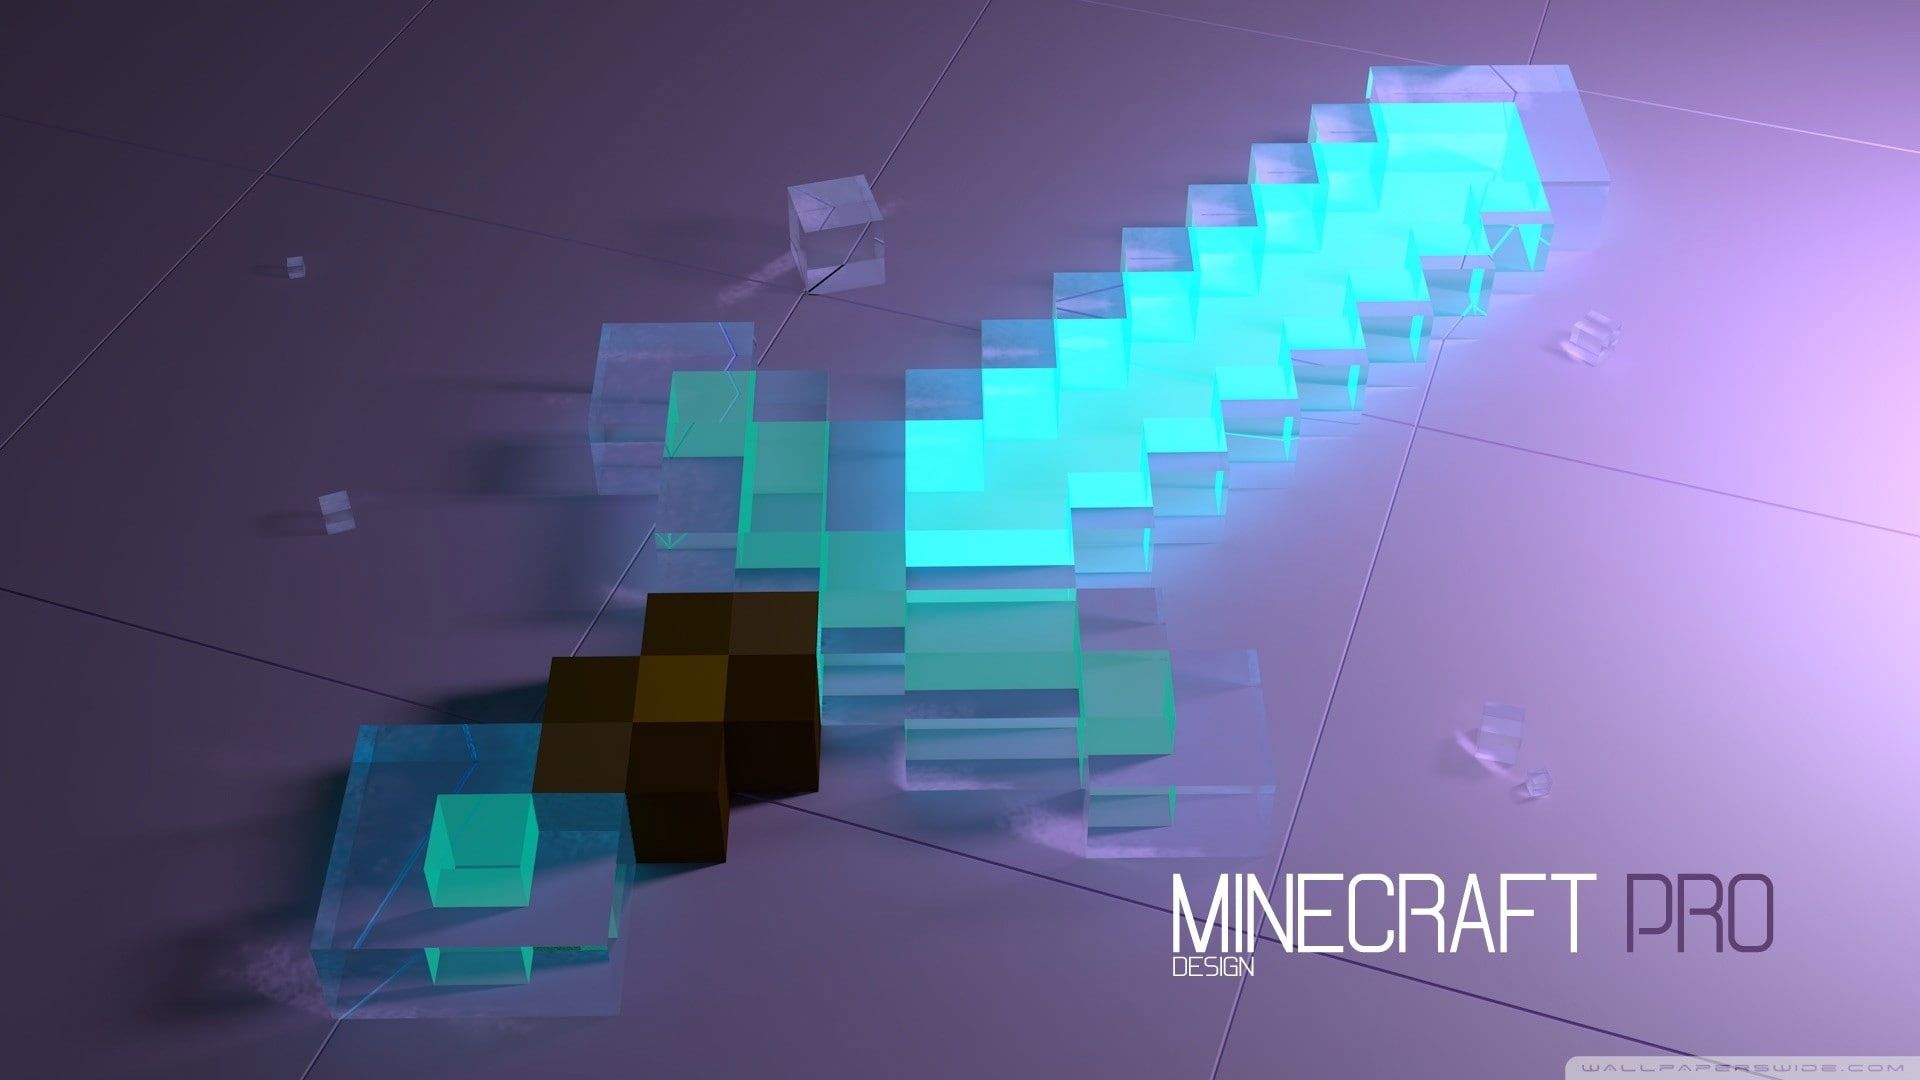 A minecraft sword with blue lighting on the ground - Minecraft